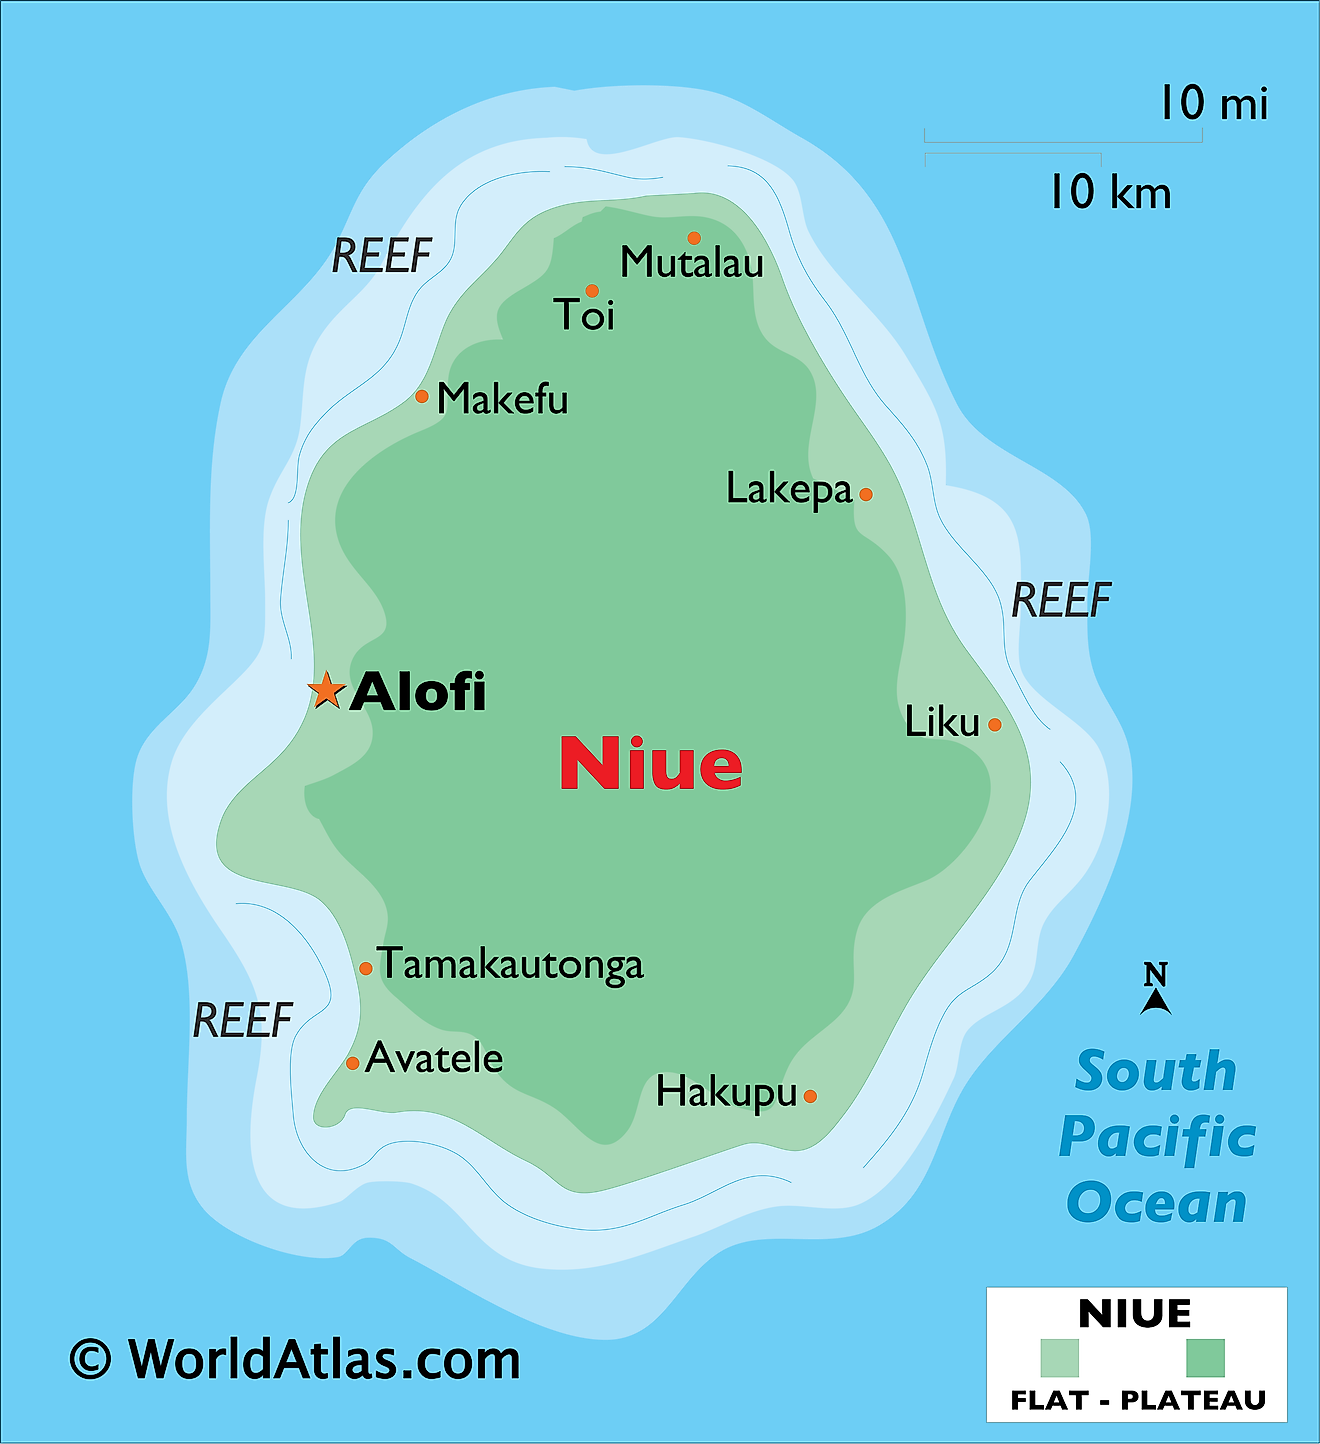 Physical Map of Niue showing relief, important settlements, etc.